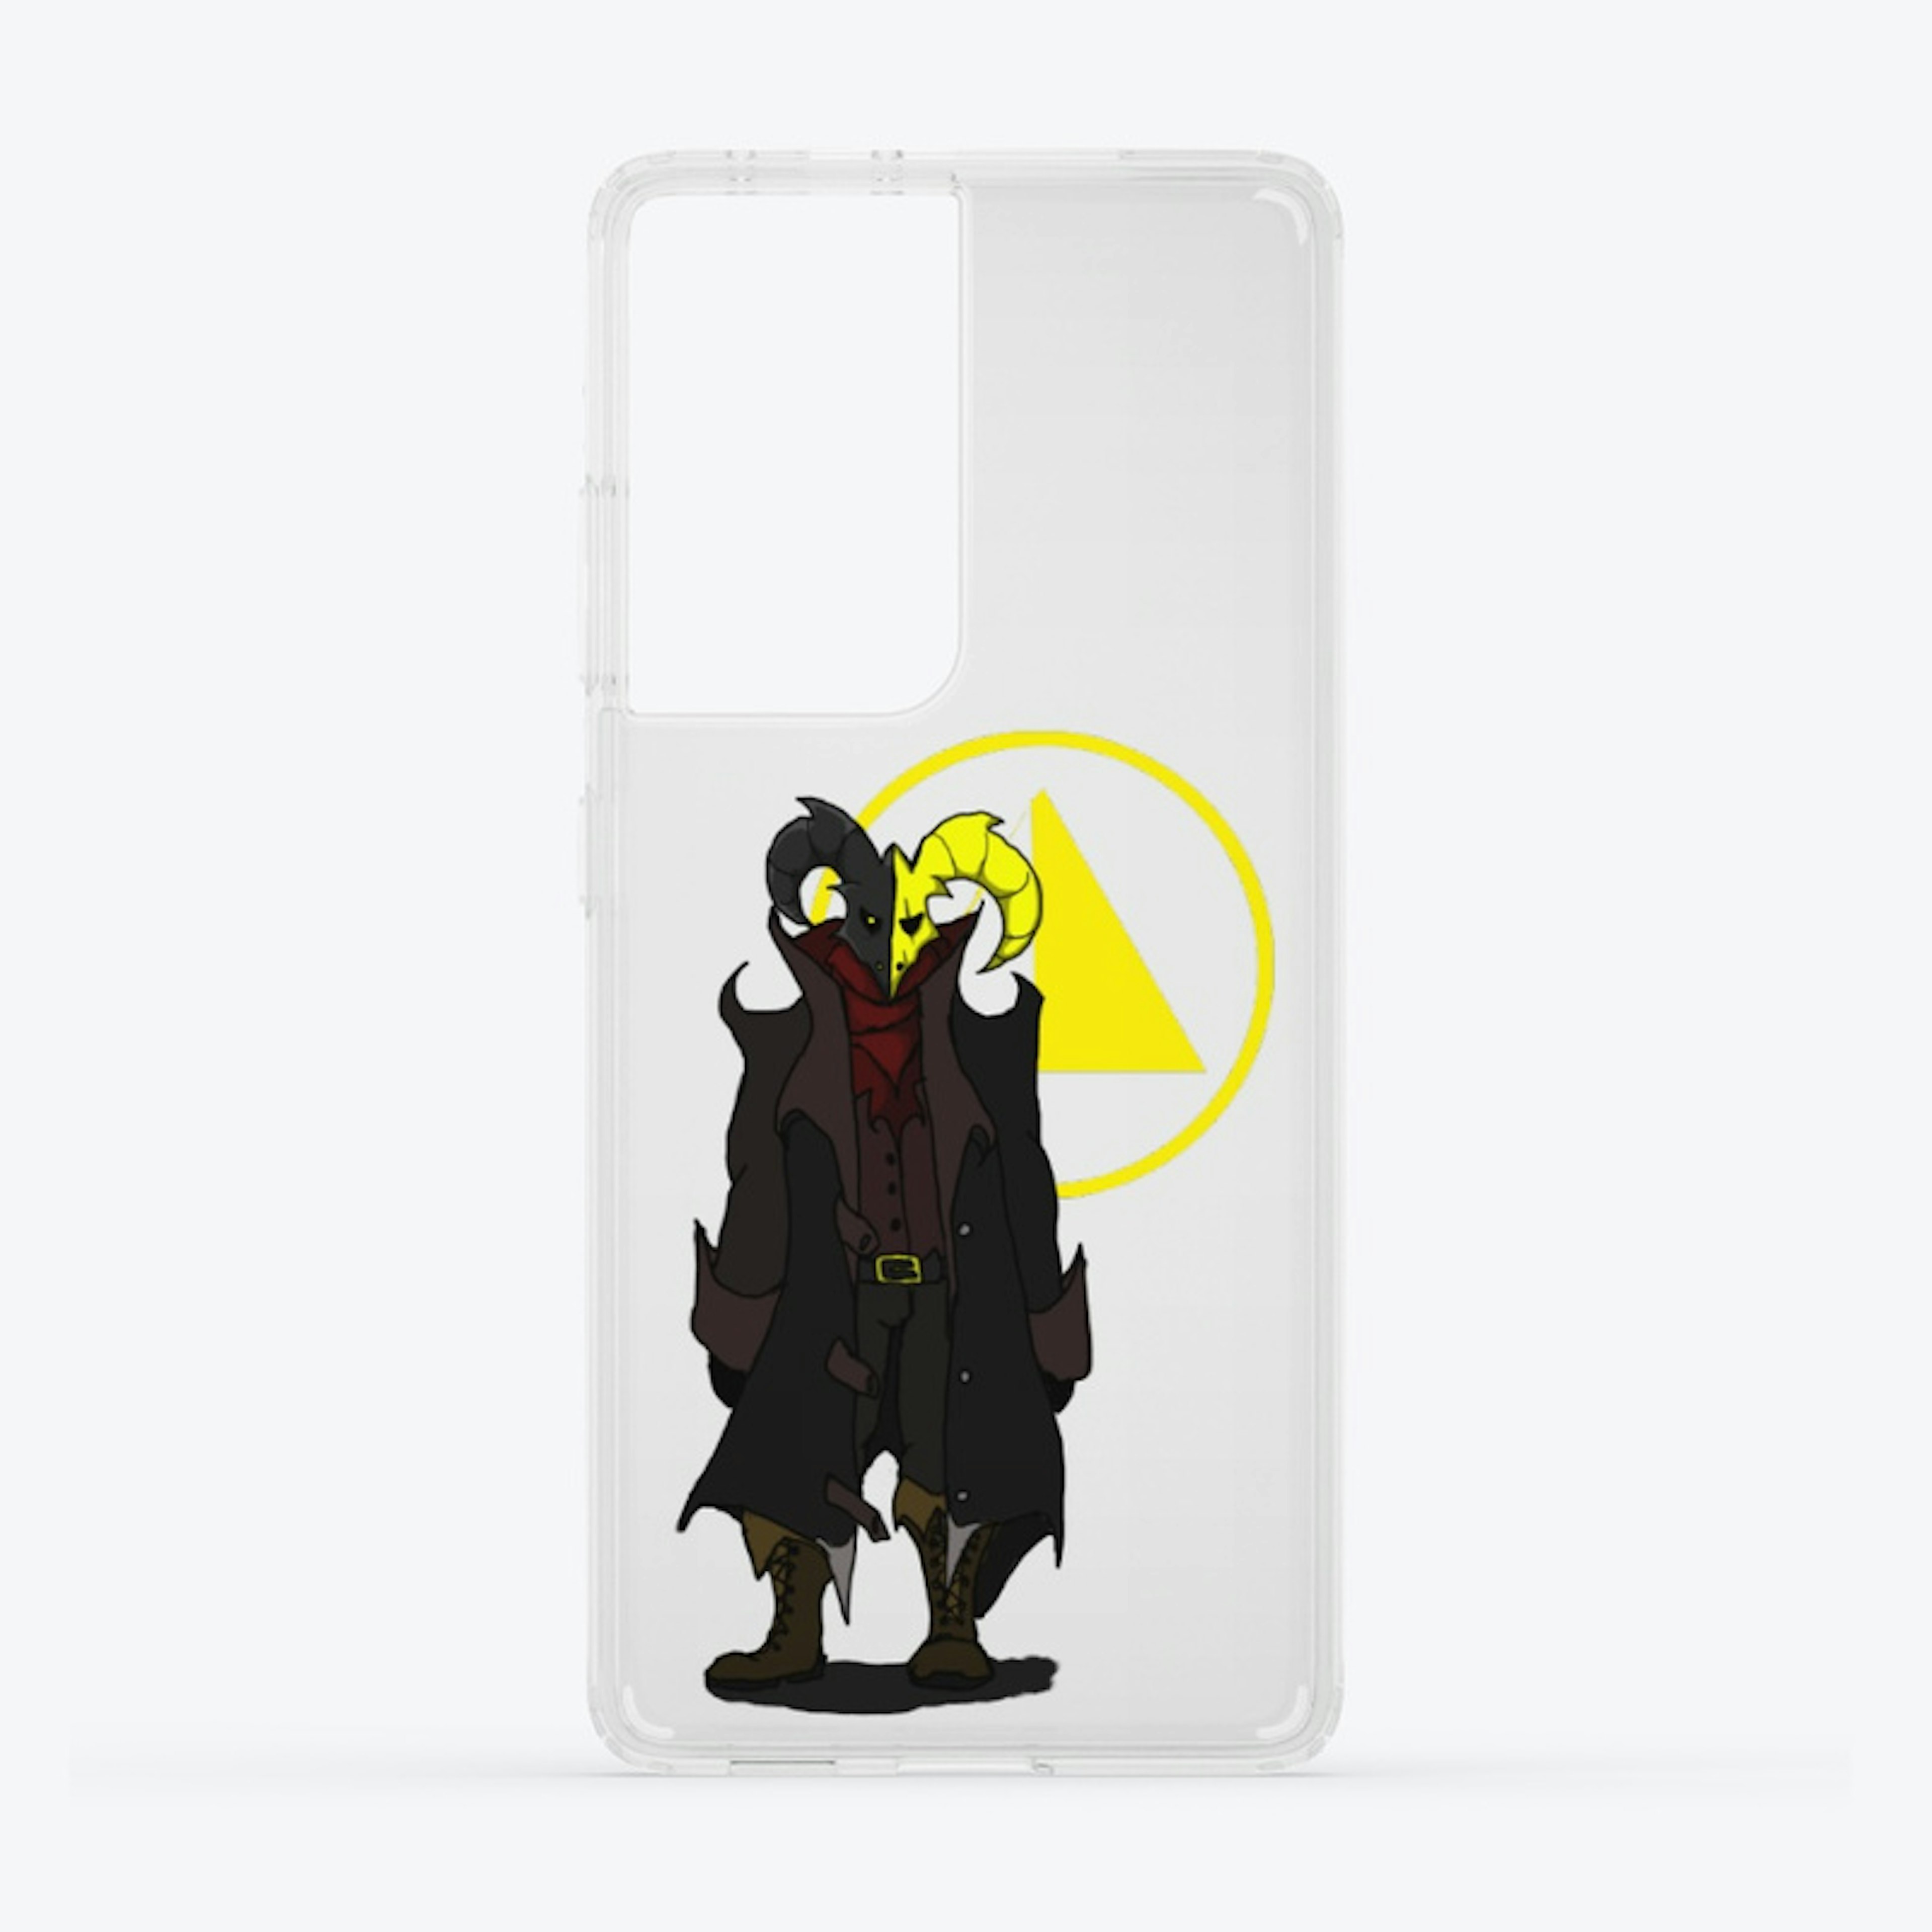 Samsung Reaper Character Case